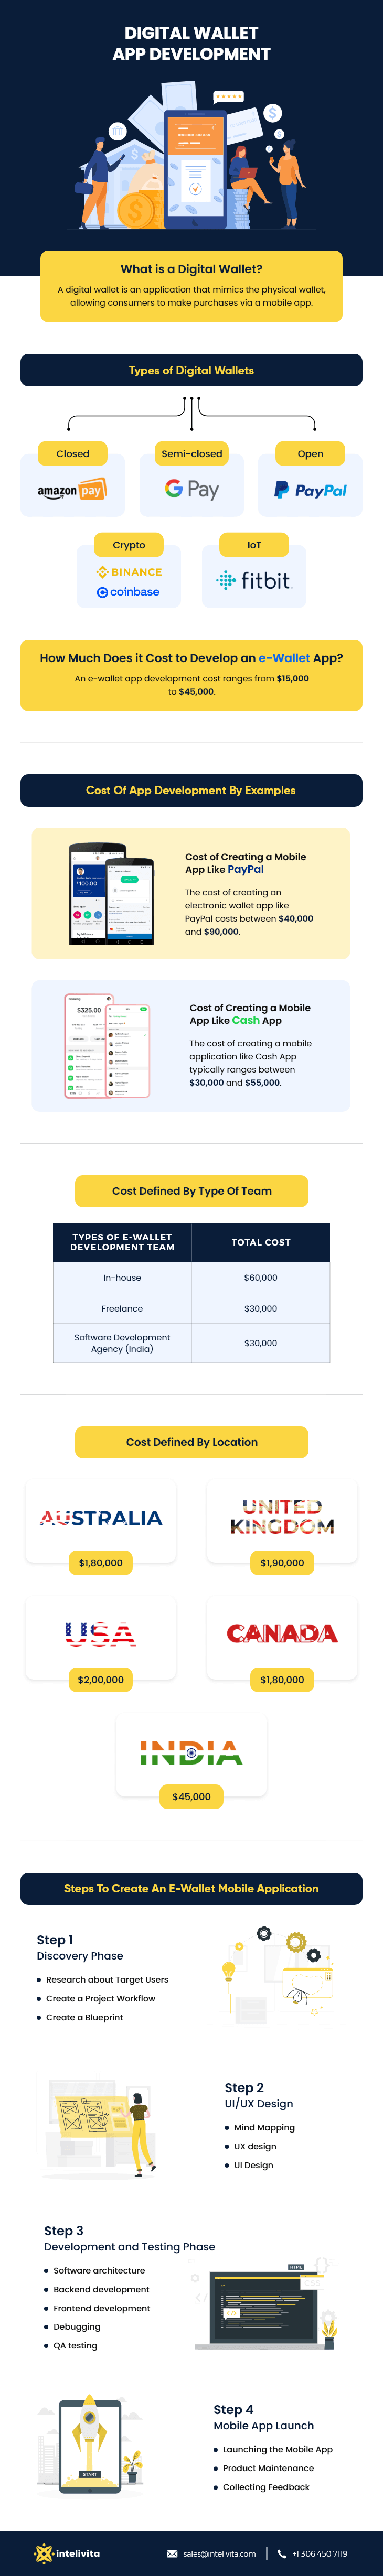 Infographic displaying What is Digital Wallet, Types of eWallets, How Much Does it Cost to Create a Digital Wallet App, along with Cost of developing Digital wallet by Examples; Moreover Cost defined by Team and Location. Also, with the Steps to Build an e-Wallet Application.